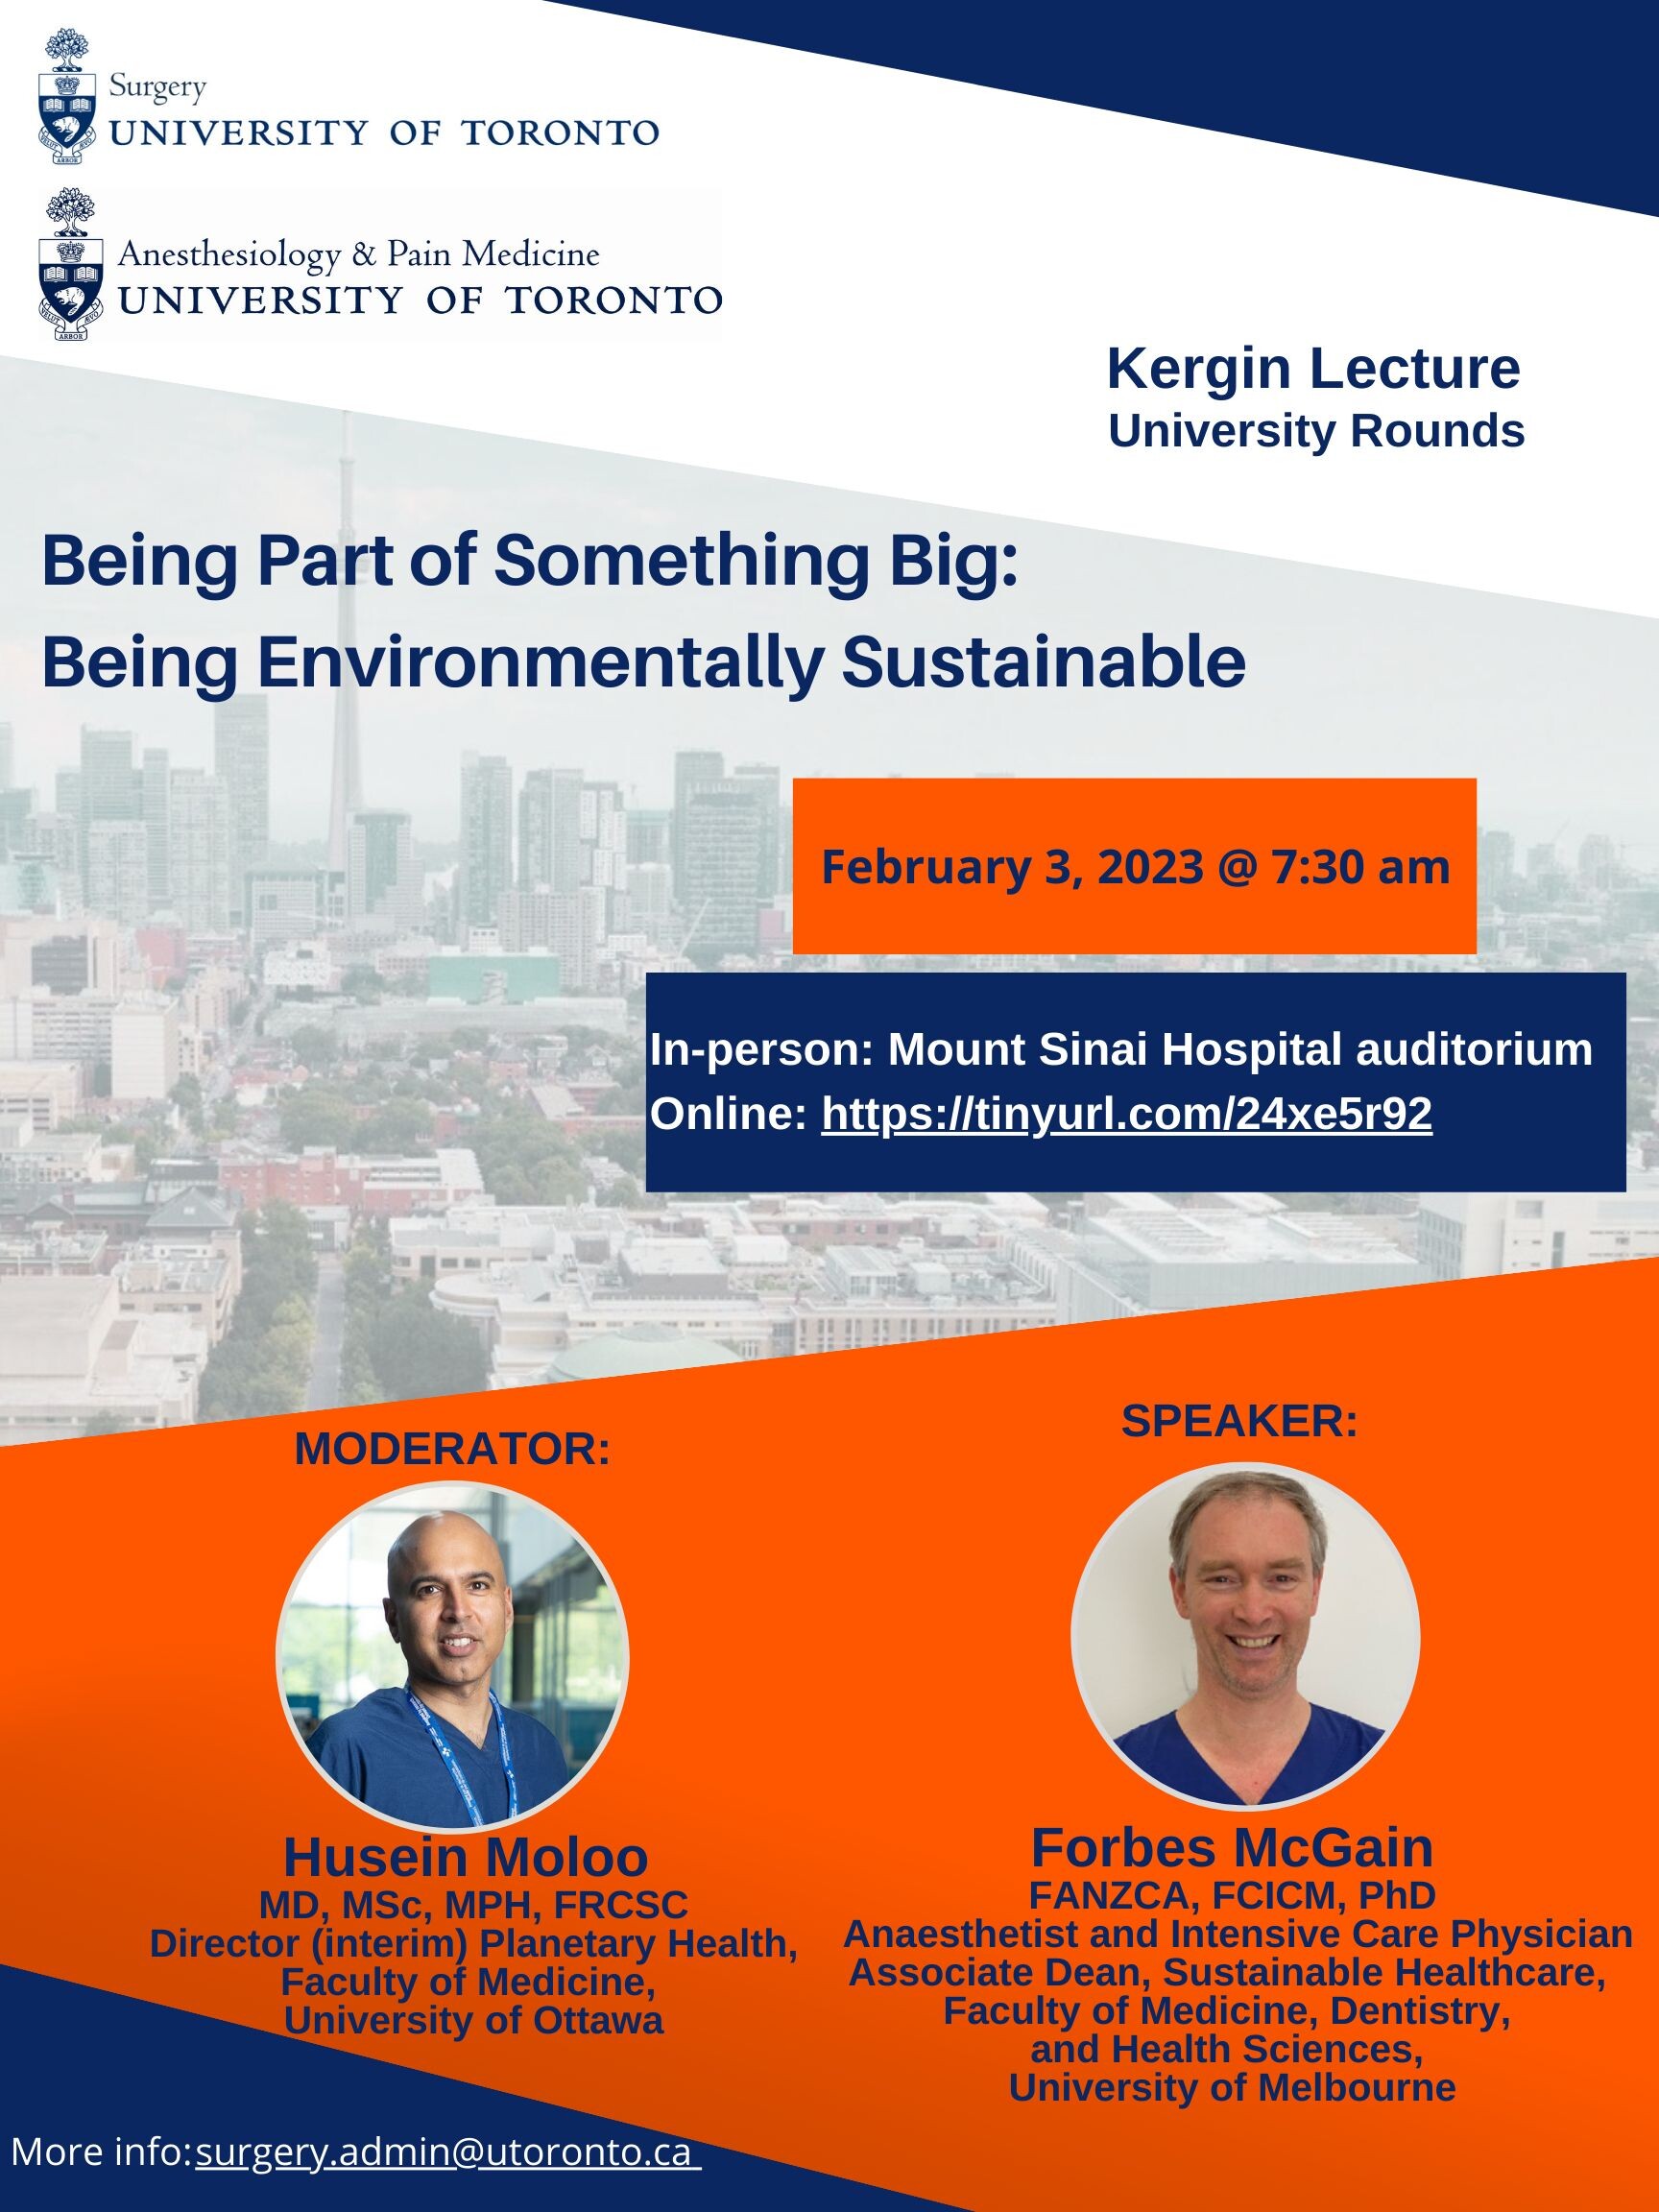 Kergin Lecture: "Being Part of Something Big: Being Environmentally Sustainable"